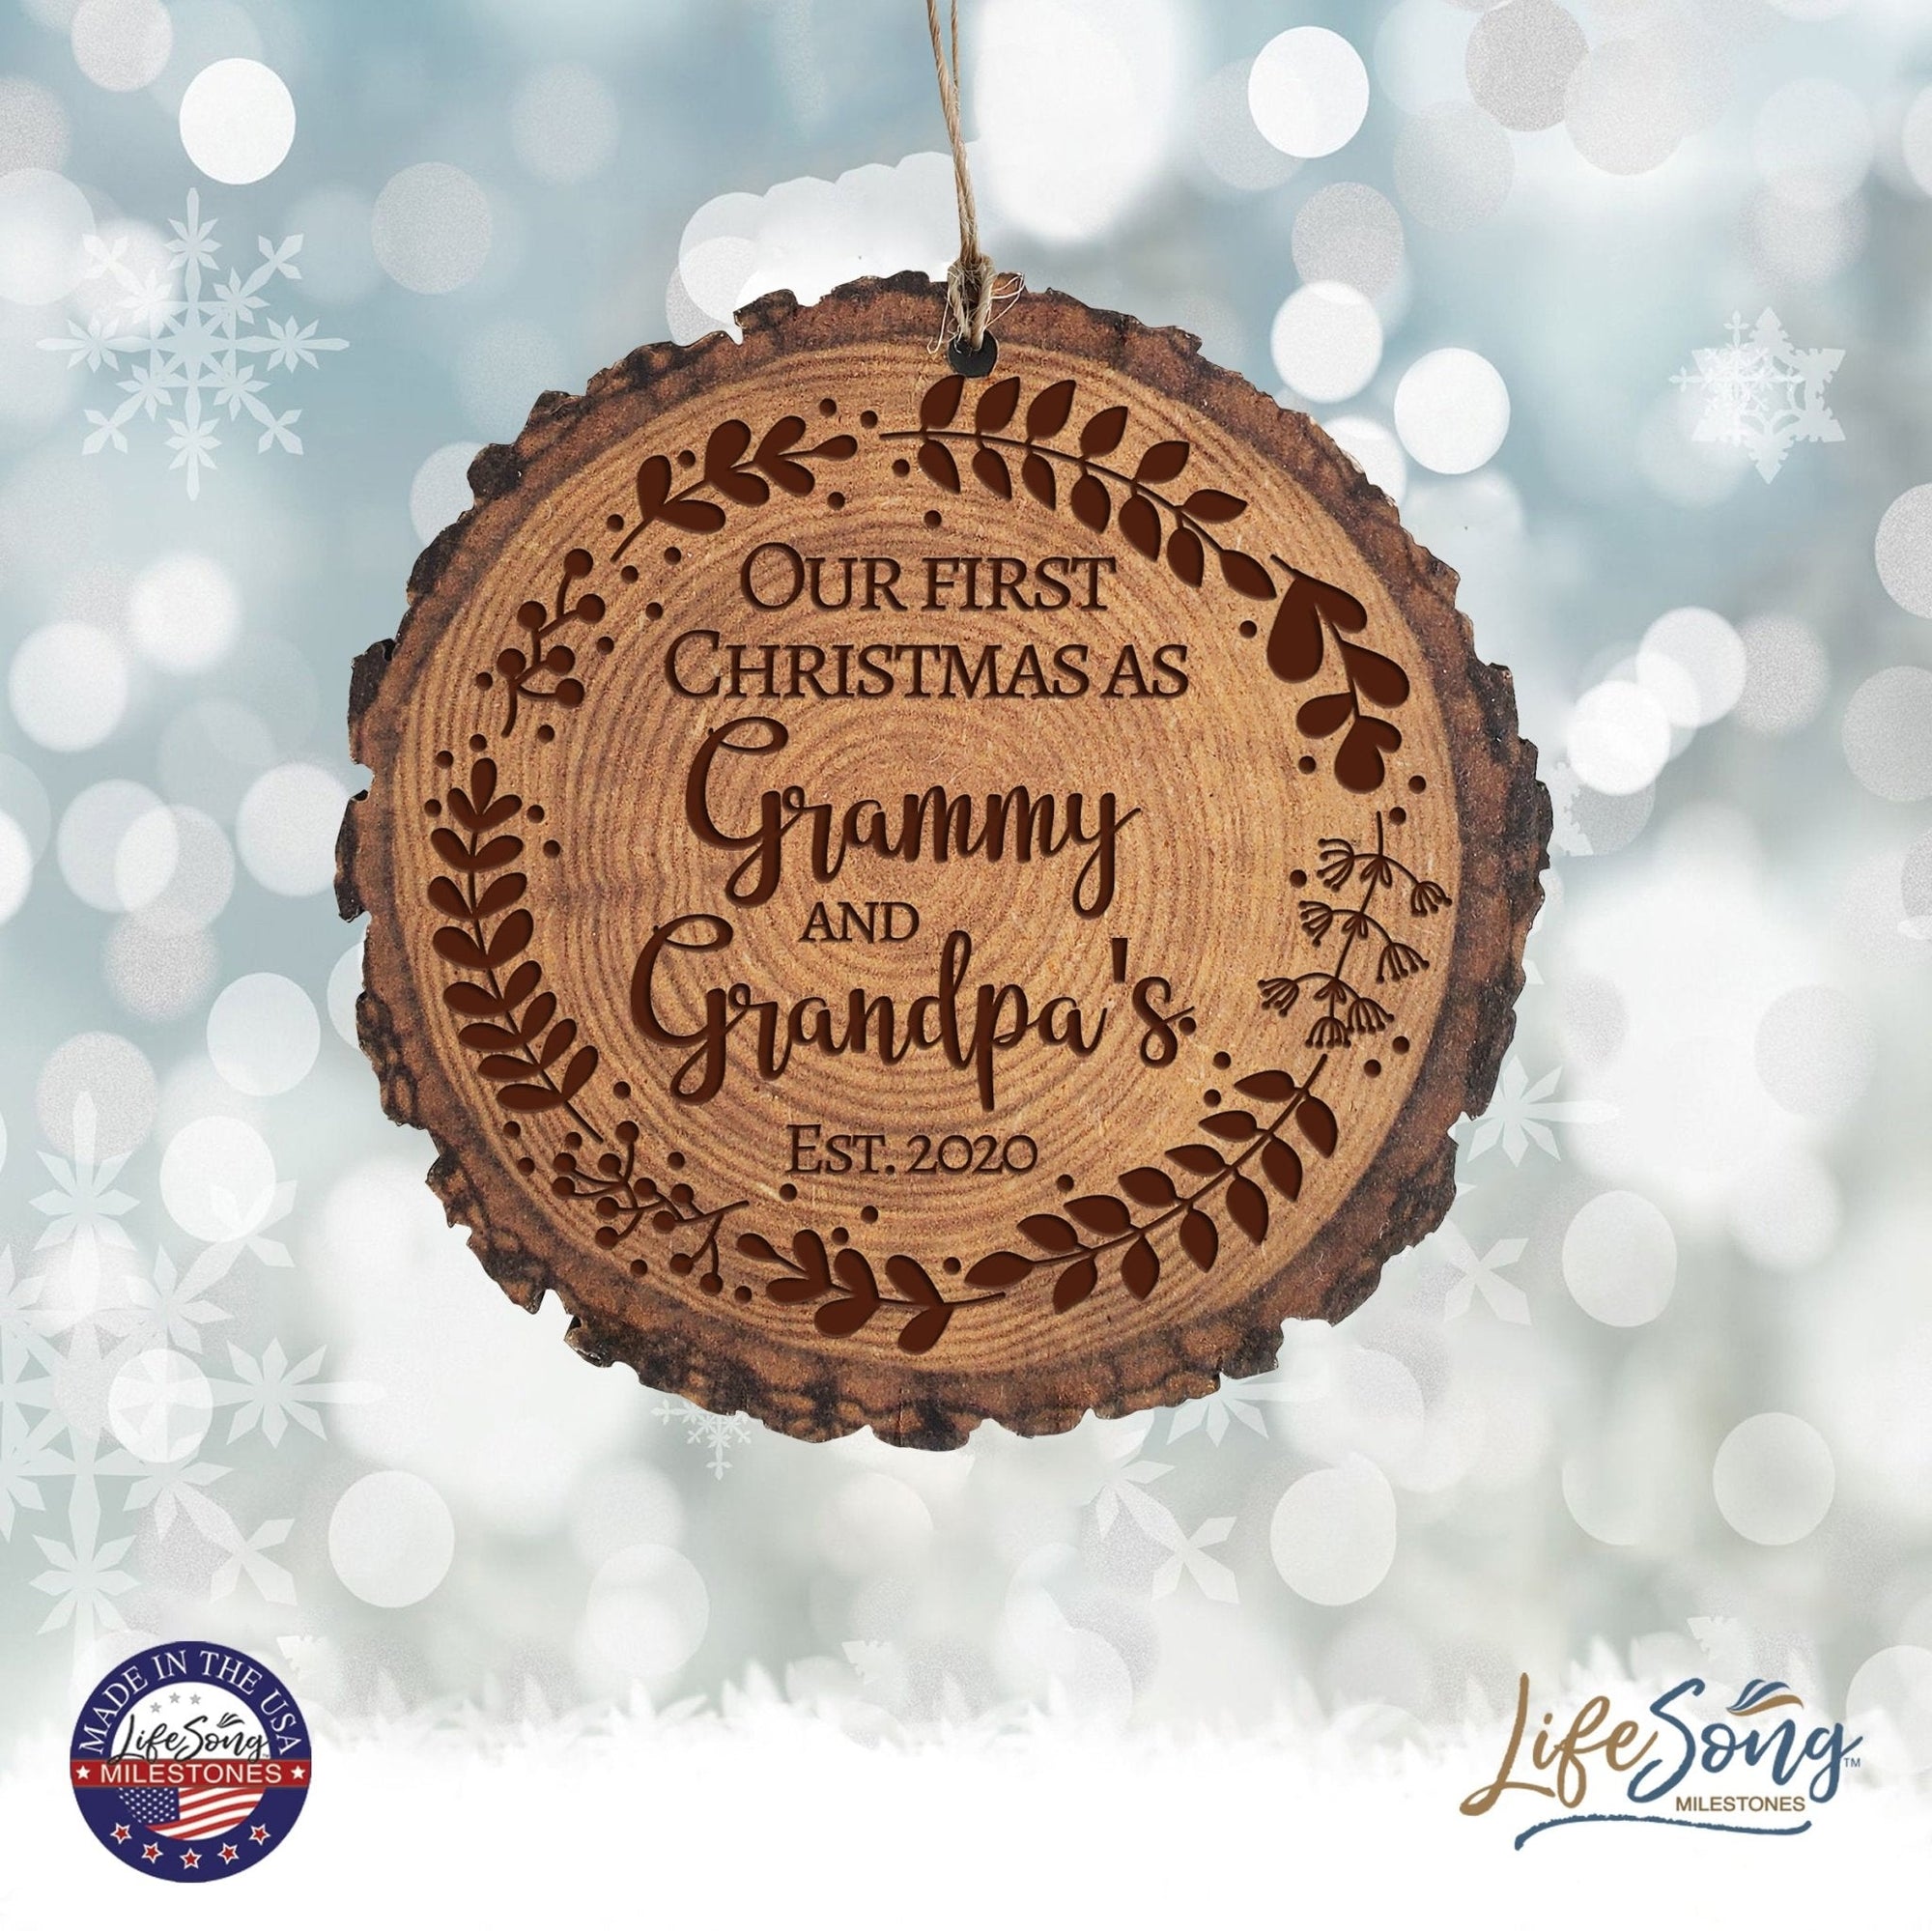 Personalized 3.75in Christmas Barky Ornament for Grandparents - Our First Christmas - LifeSong Milestones